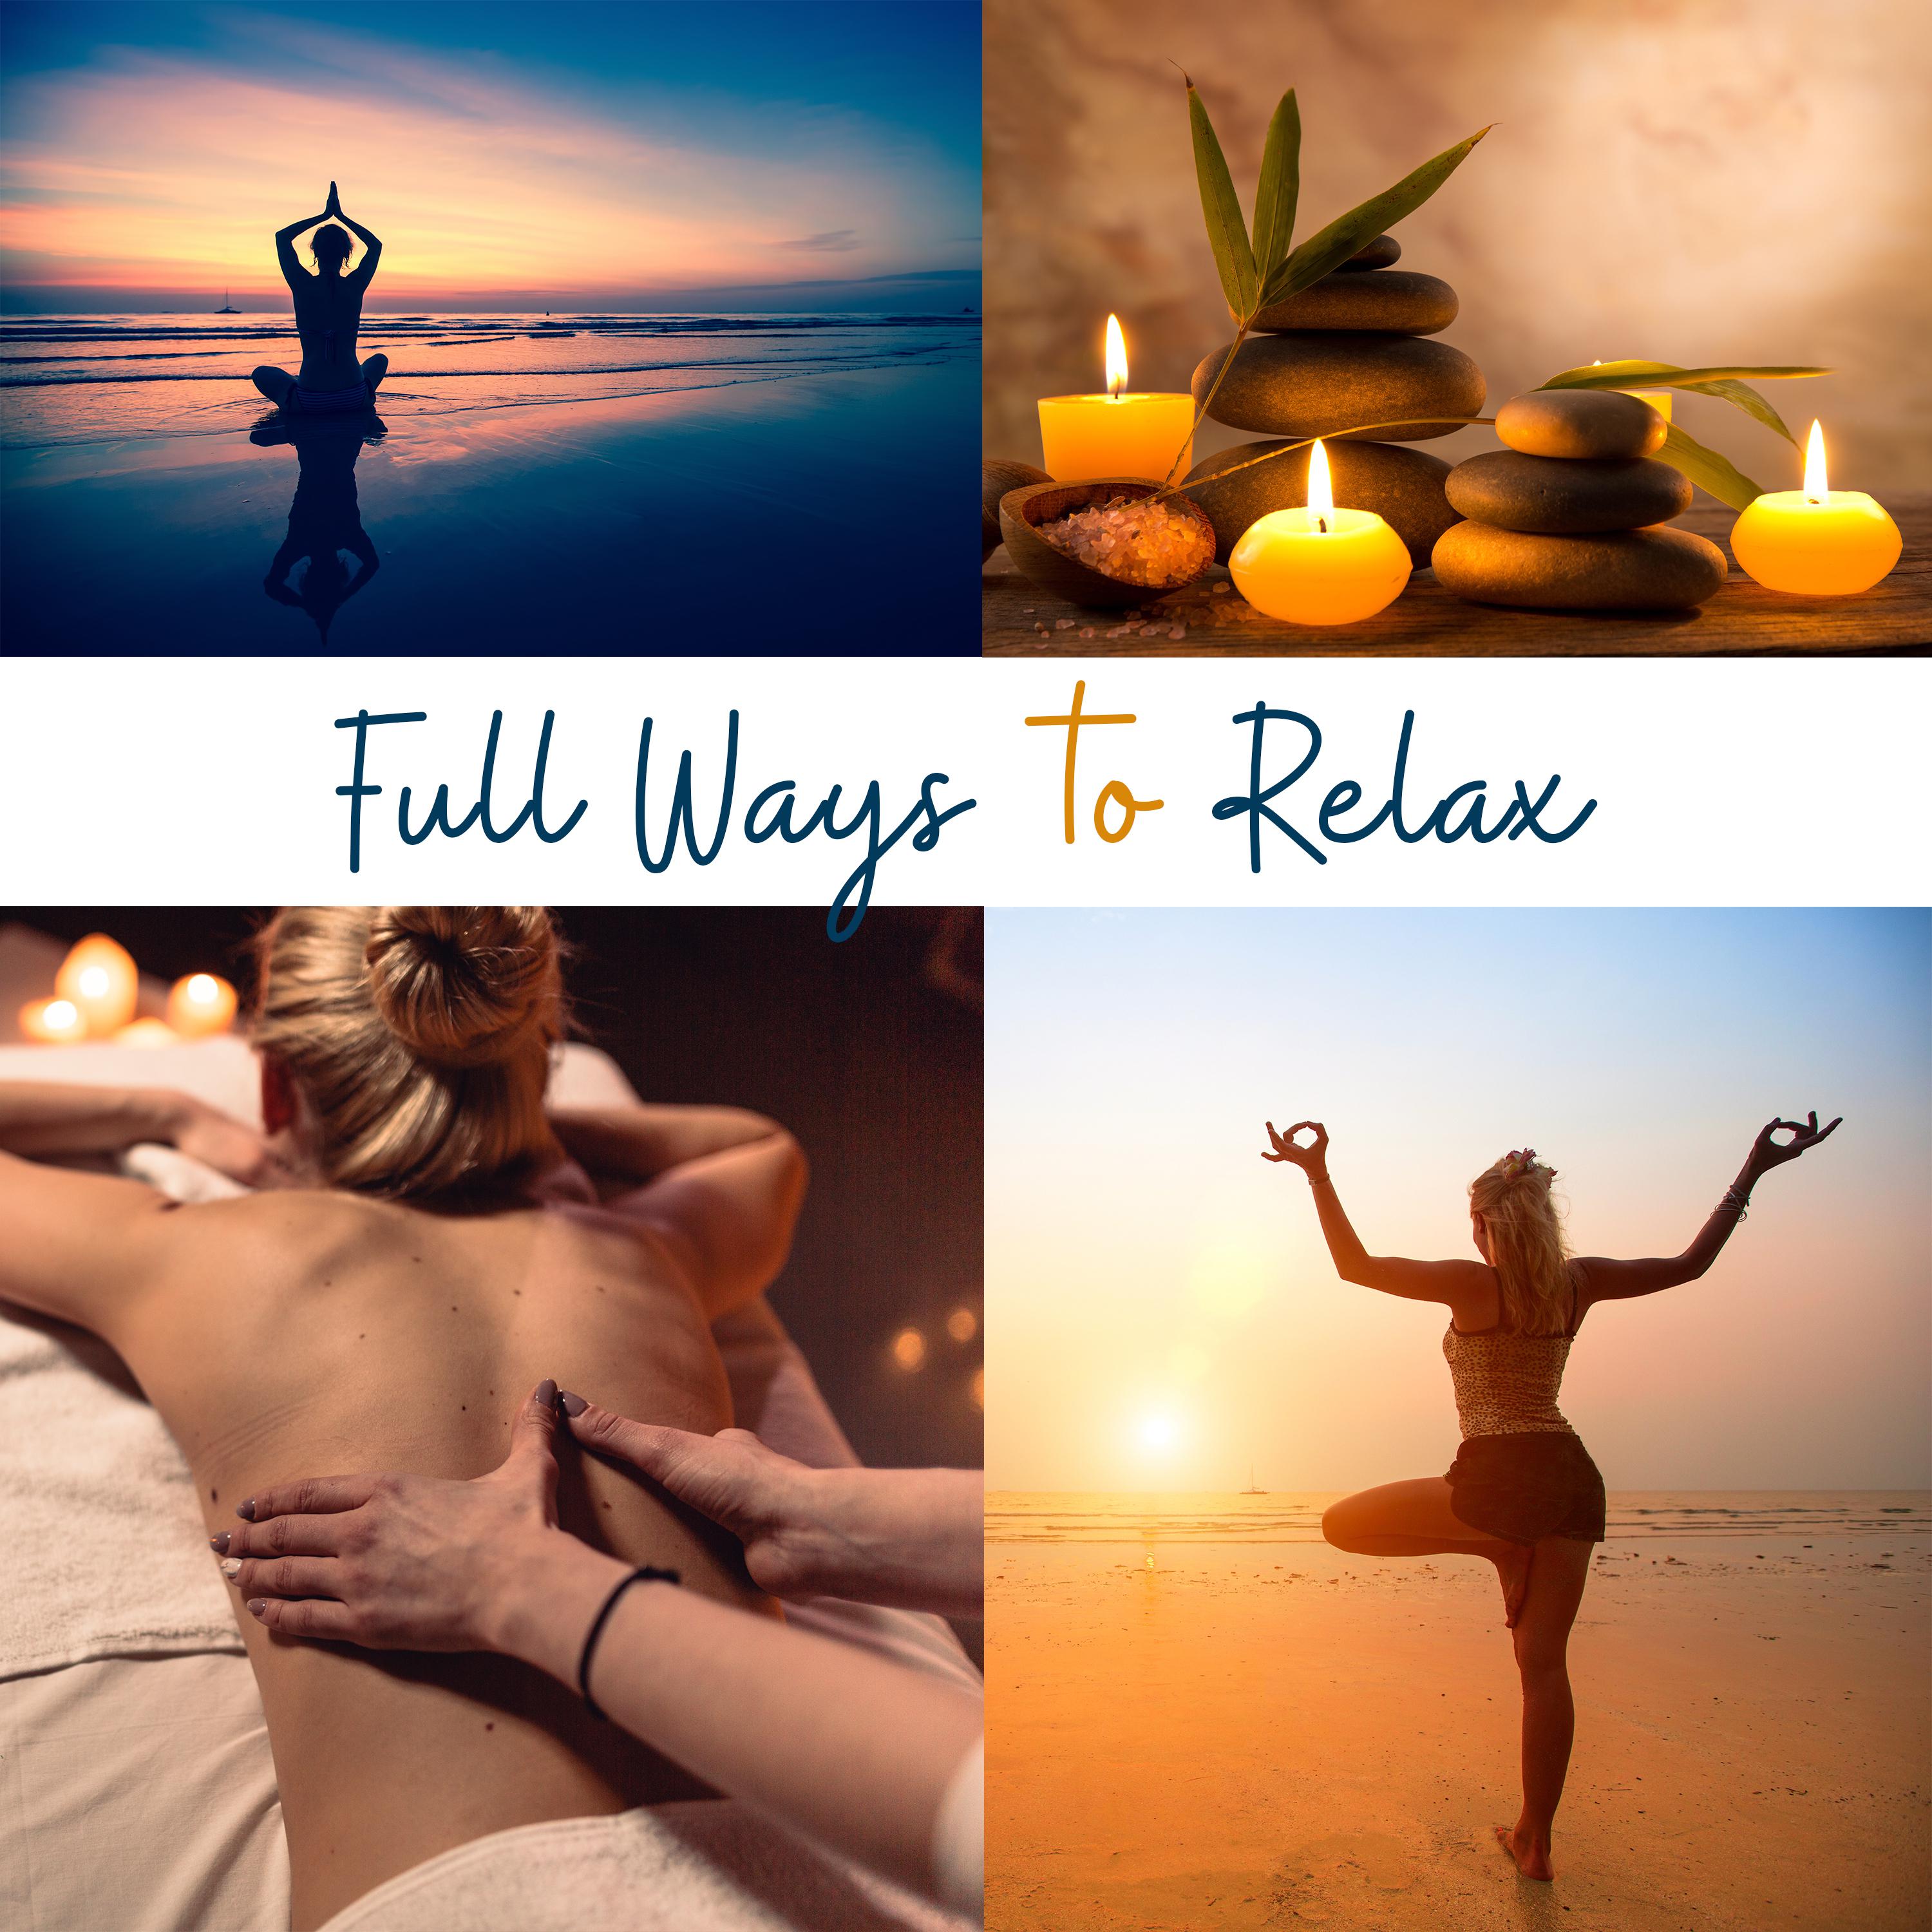 Full Ways to Relax  Best Music Collection for Meditation, Relaxation, Spa, Massage, Yoga Exercises, Mindfulness Meditation